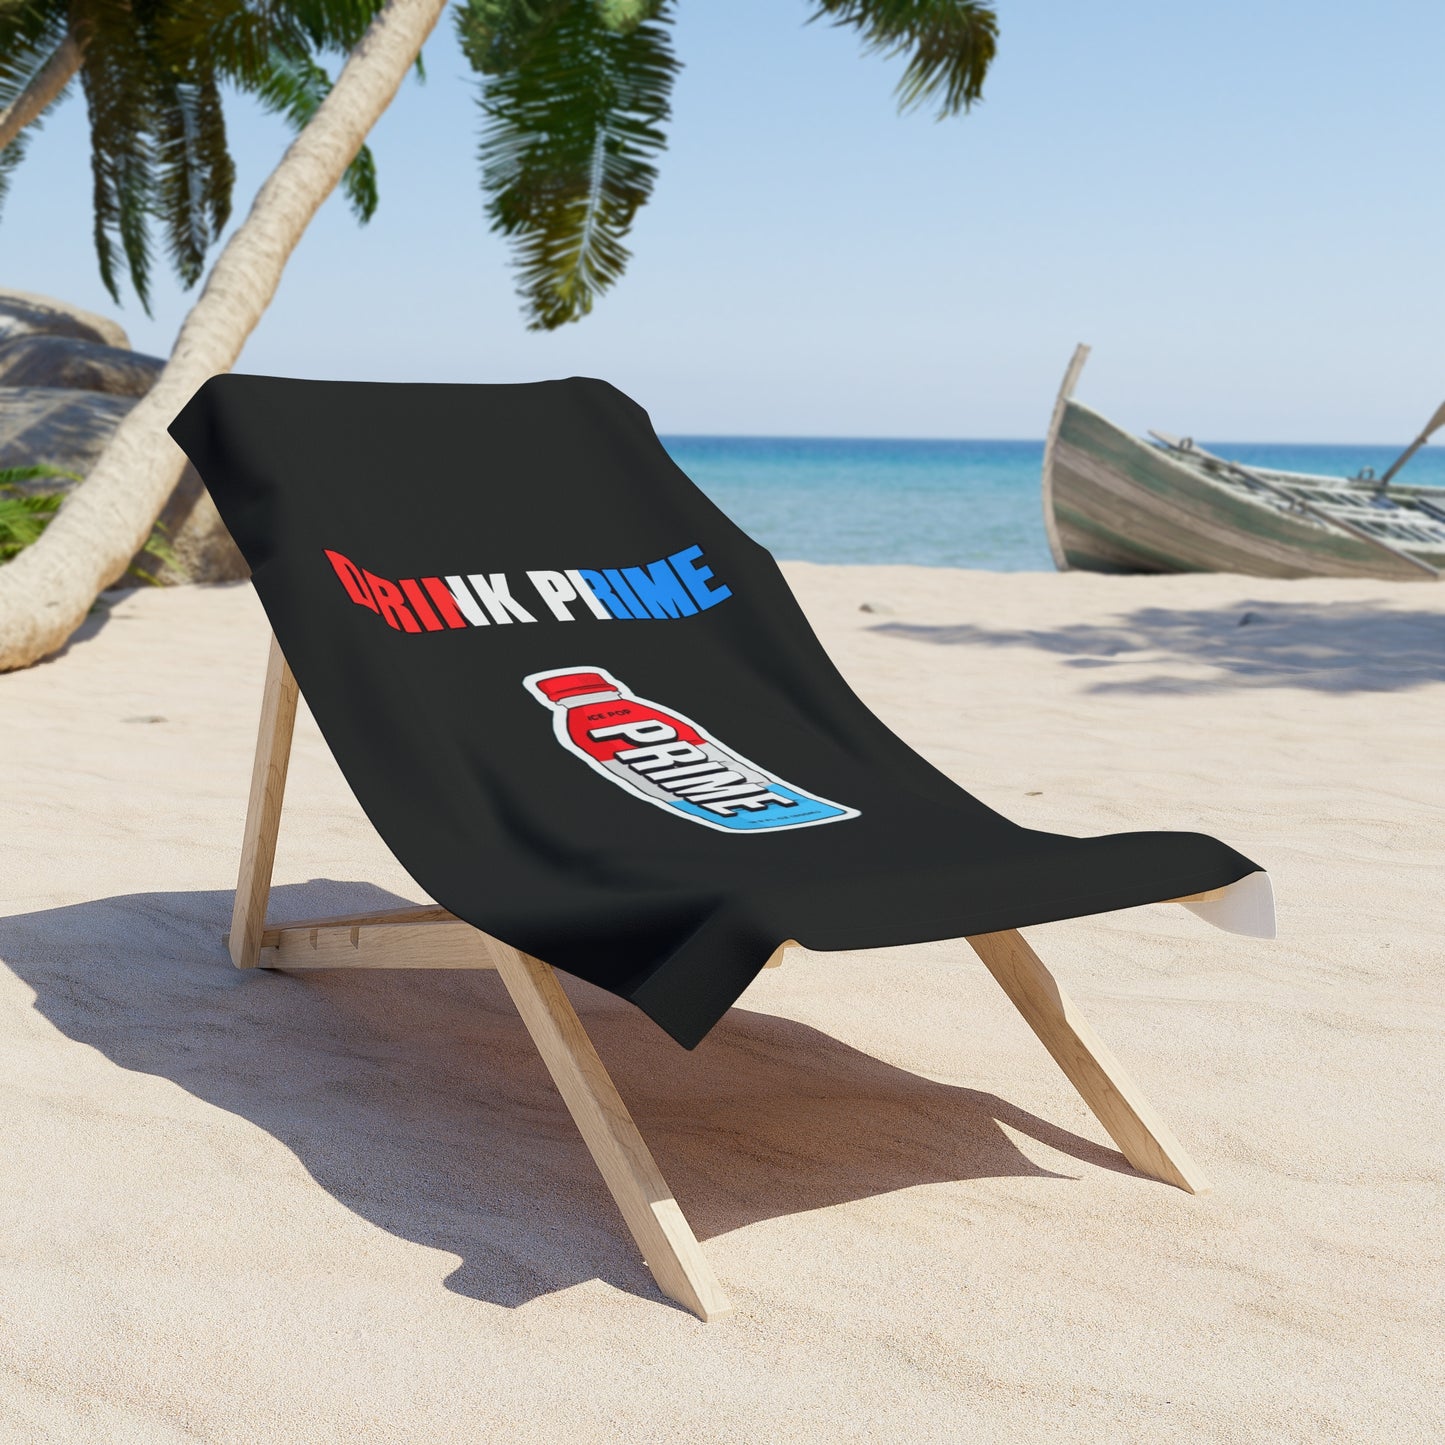 Drink Prime Hydration Beach Towel, Free Shipping